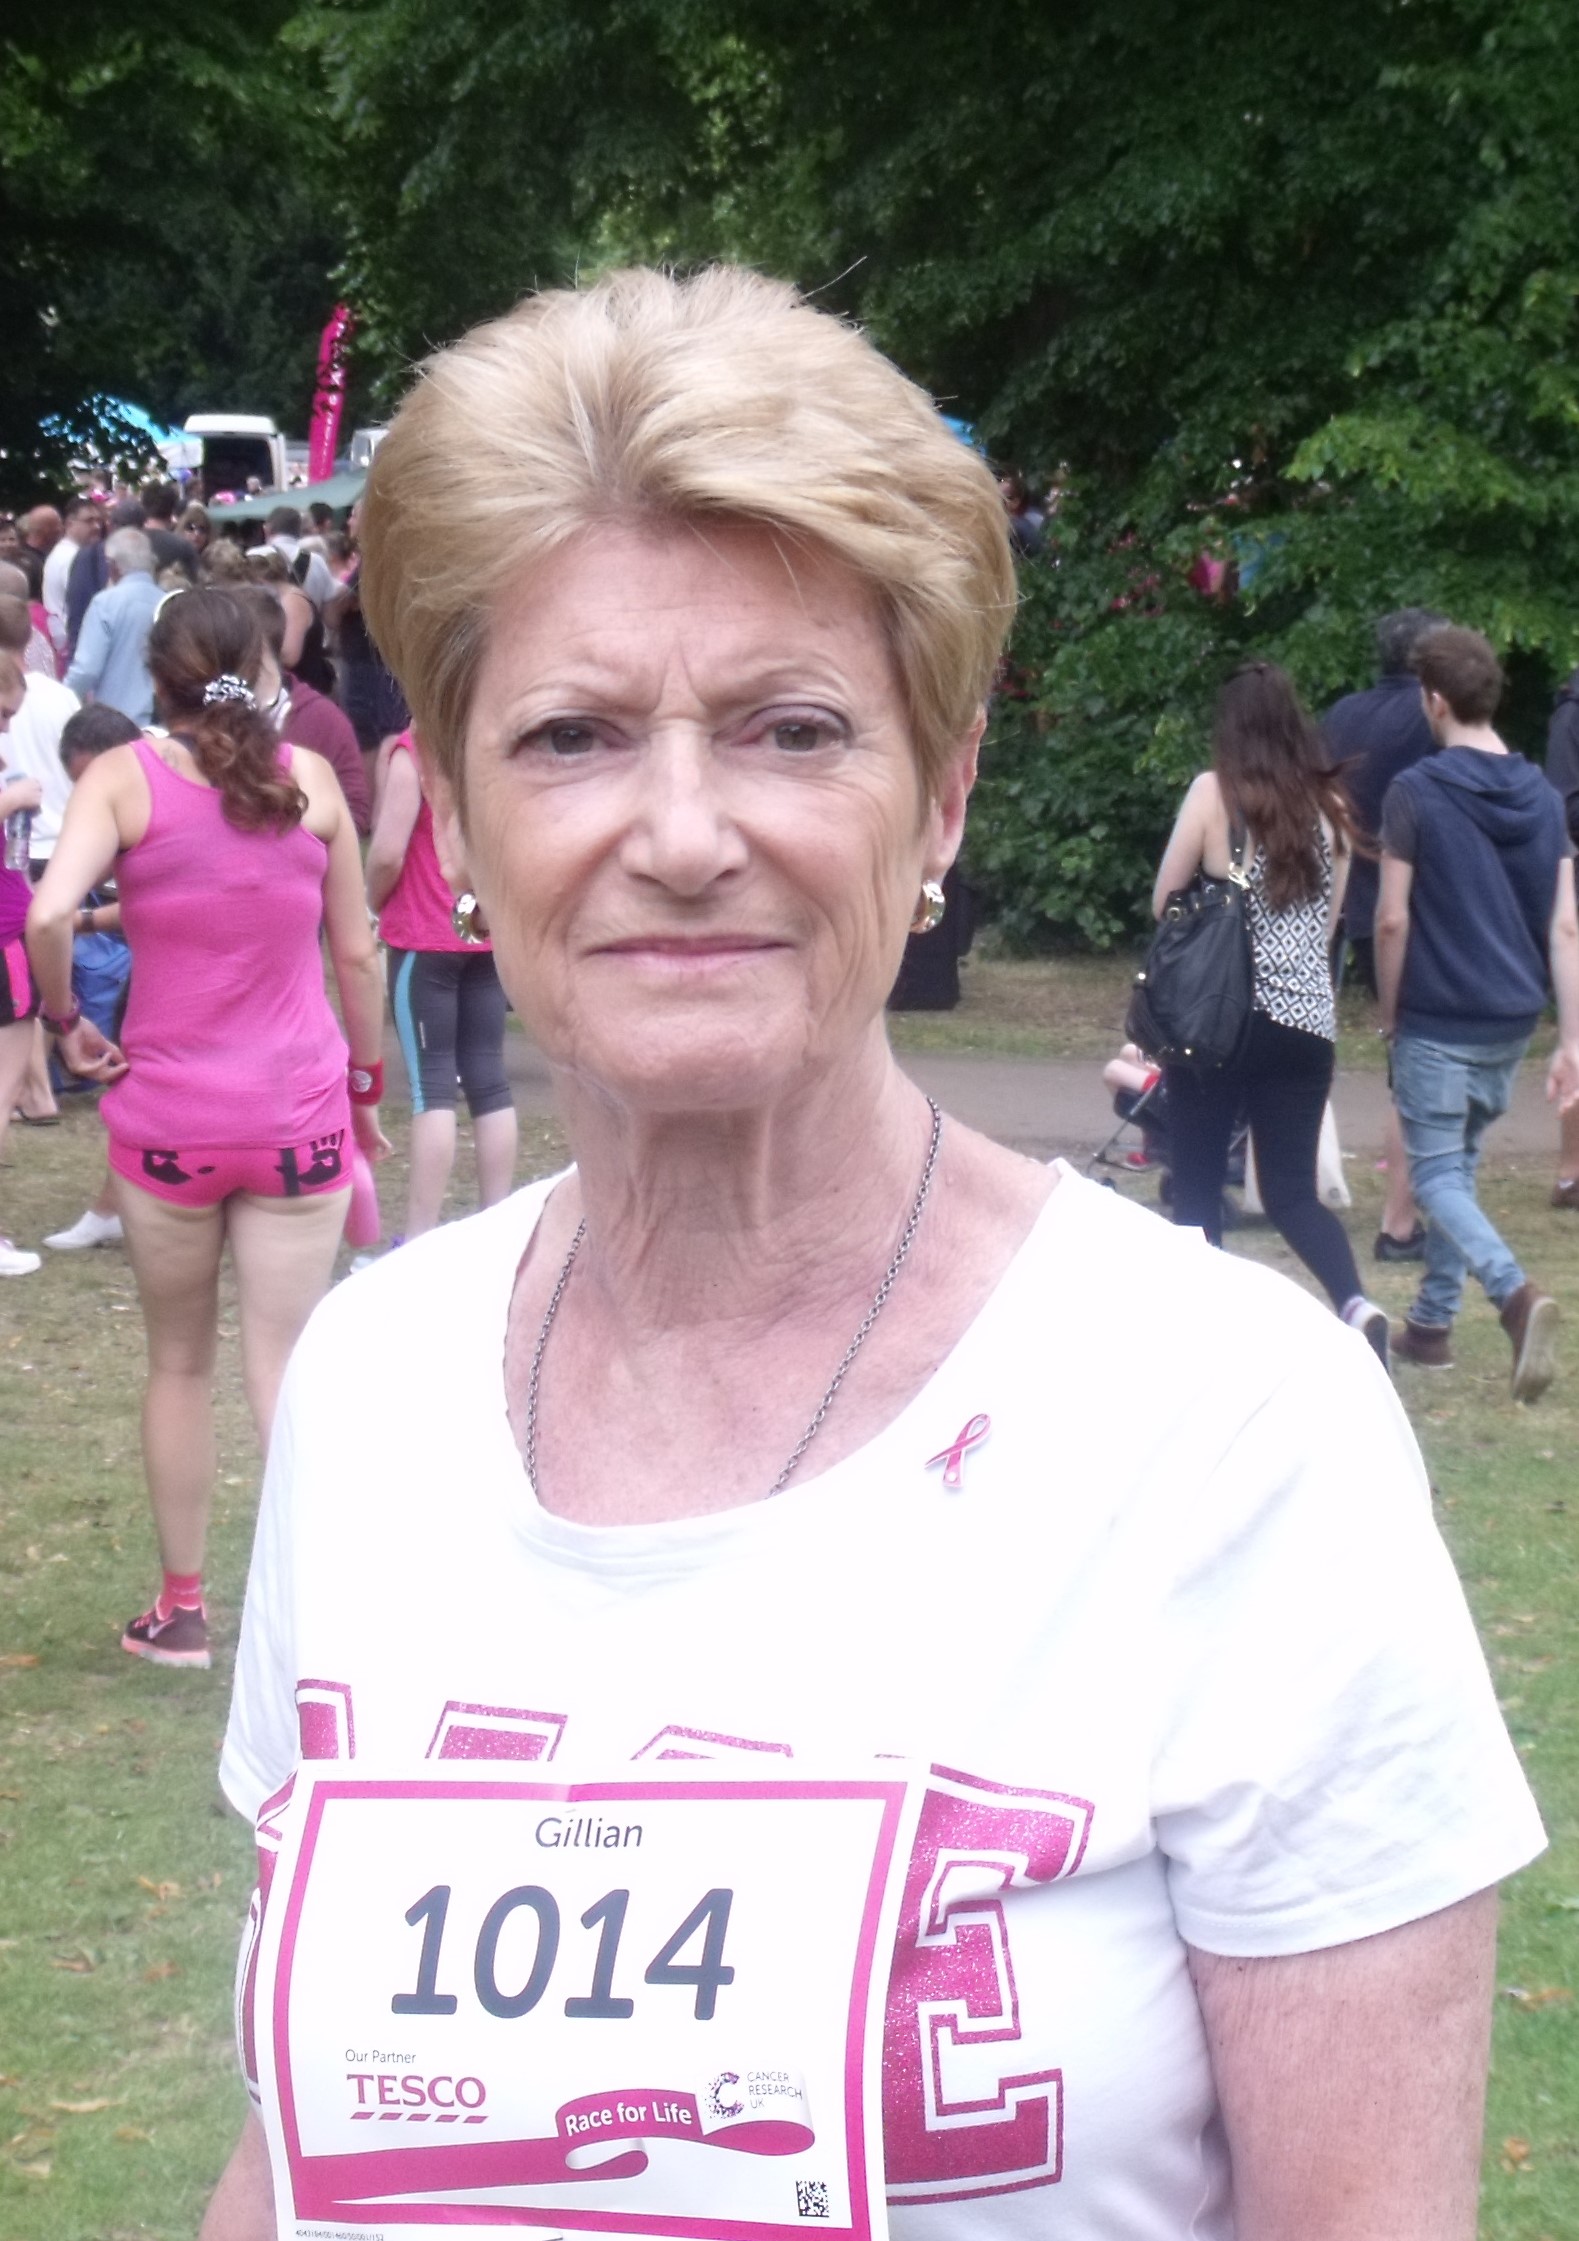 Gillian at The Race for Life